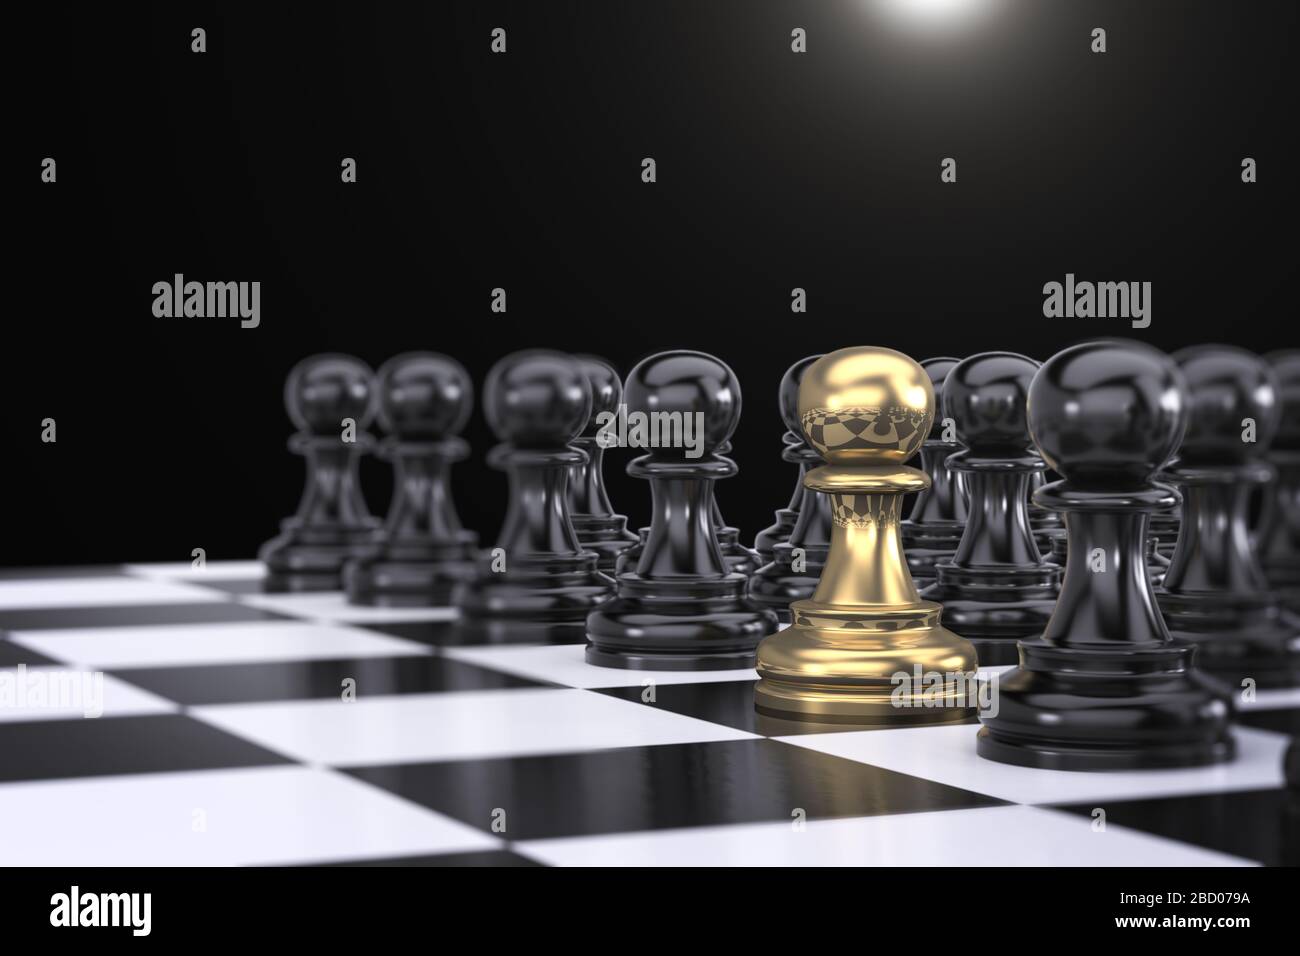 Gold and Black chess concept, 3d illustration. The Staff or Employees with outstanding work, chosen one. Business and Strategic Planning Concept. Stock Photo